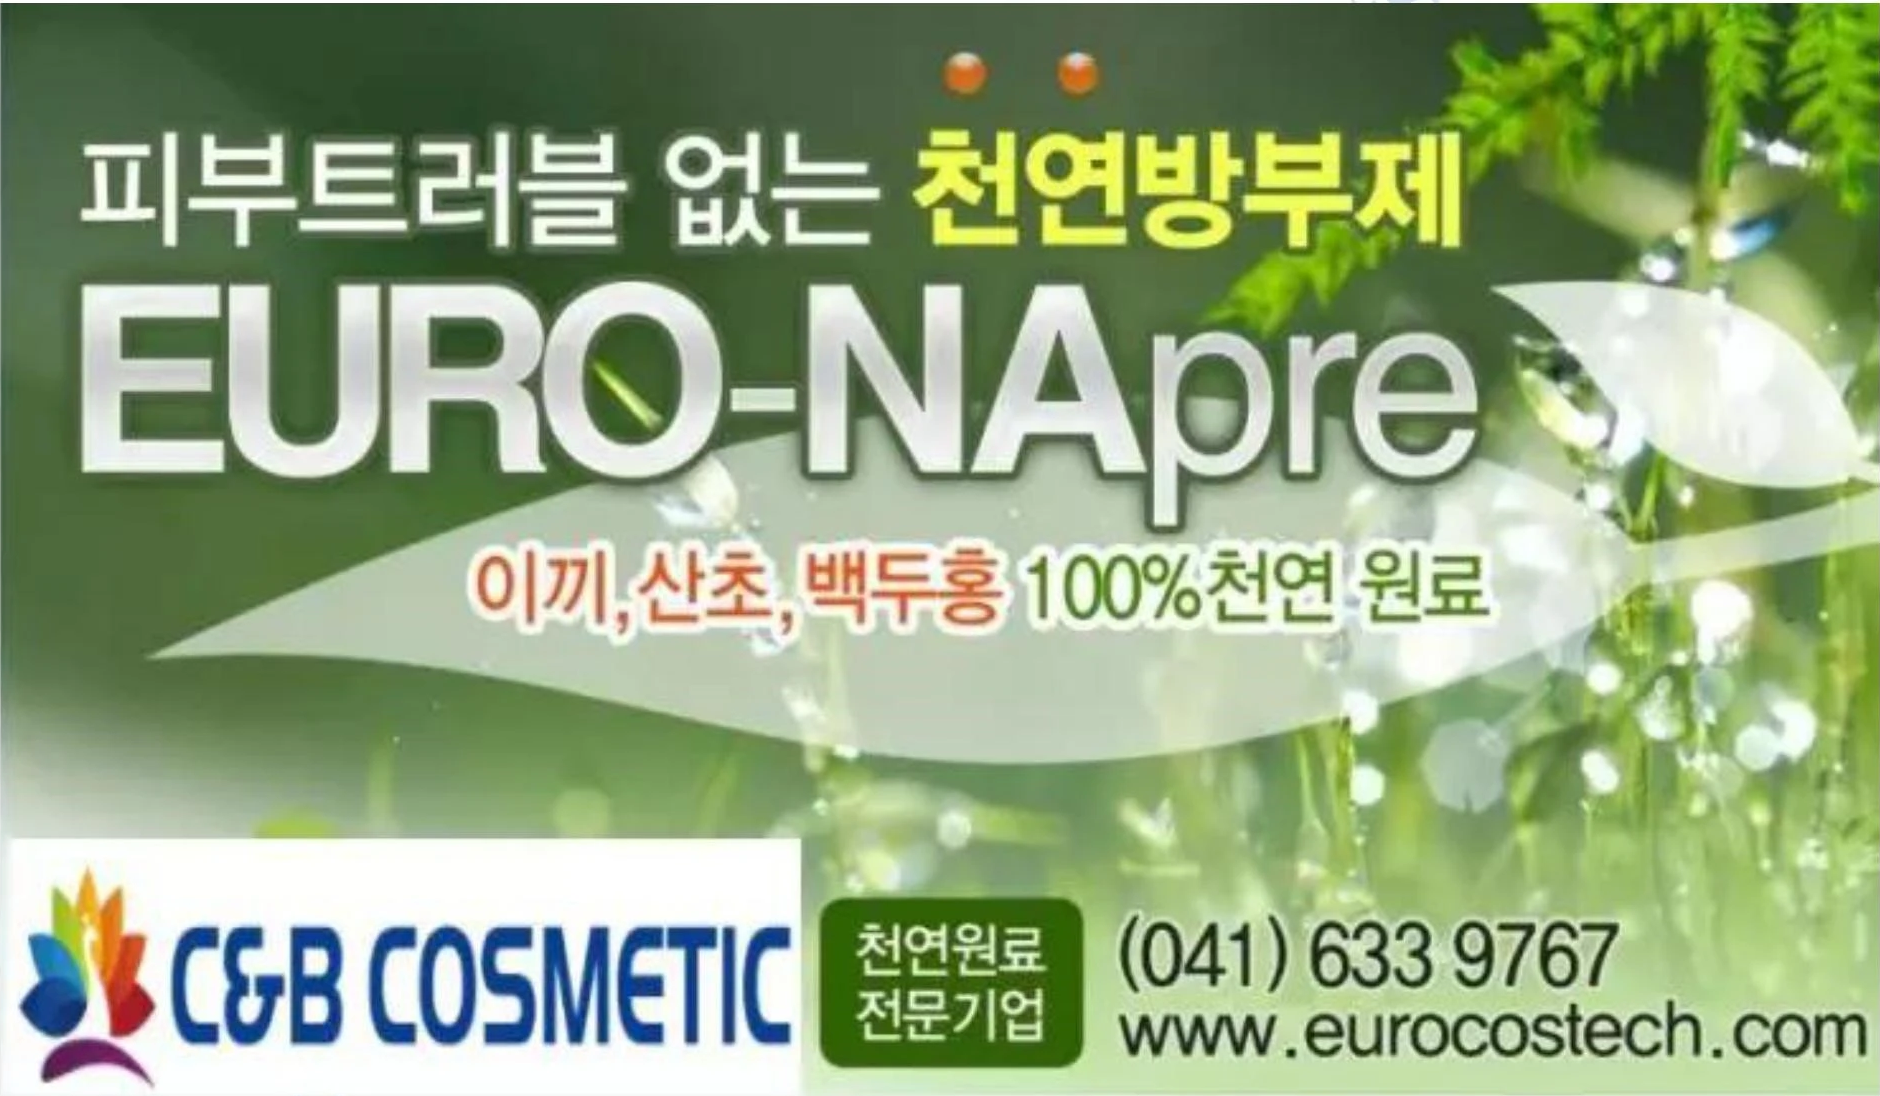 Statement of EURO-NApre Article Removal by Mr. Lue Dong V